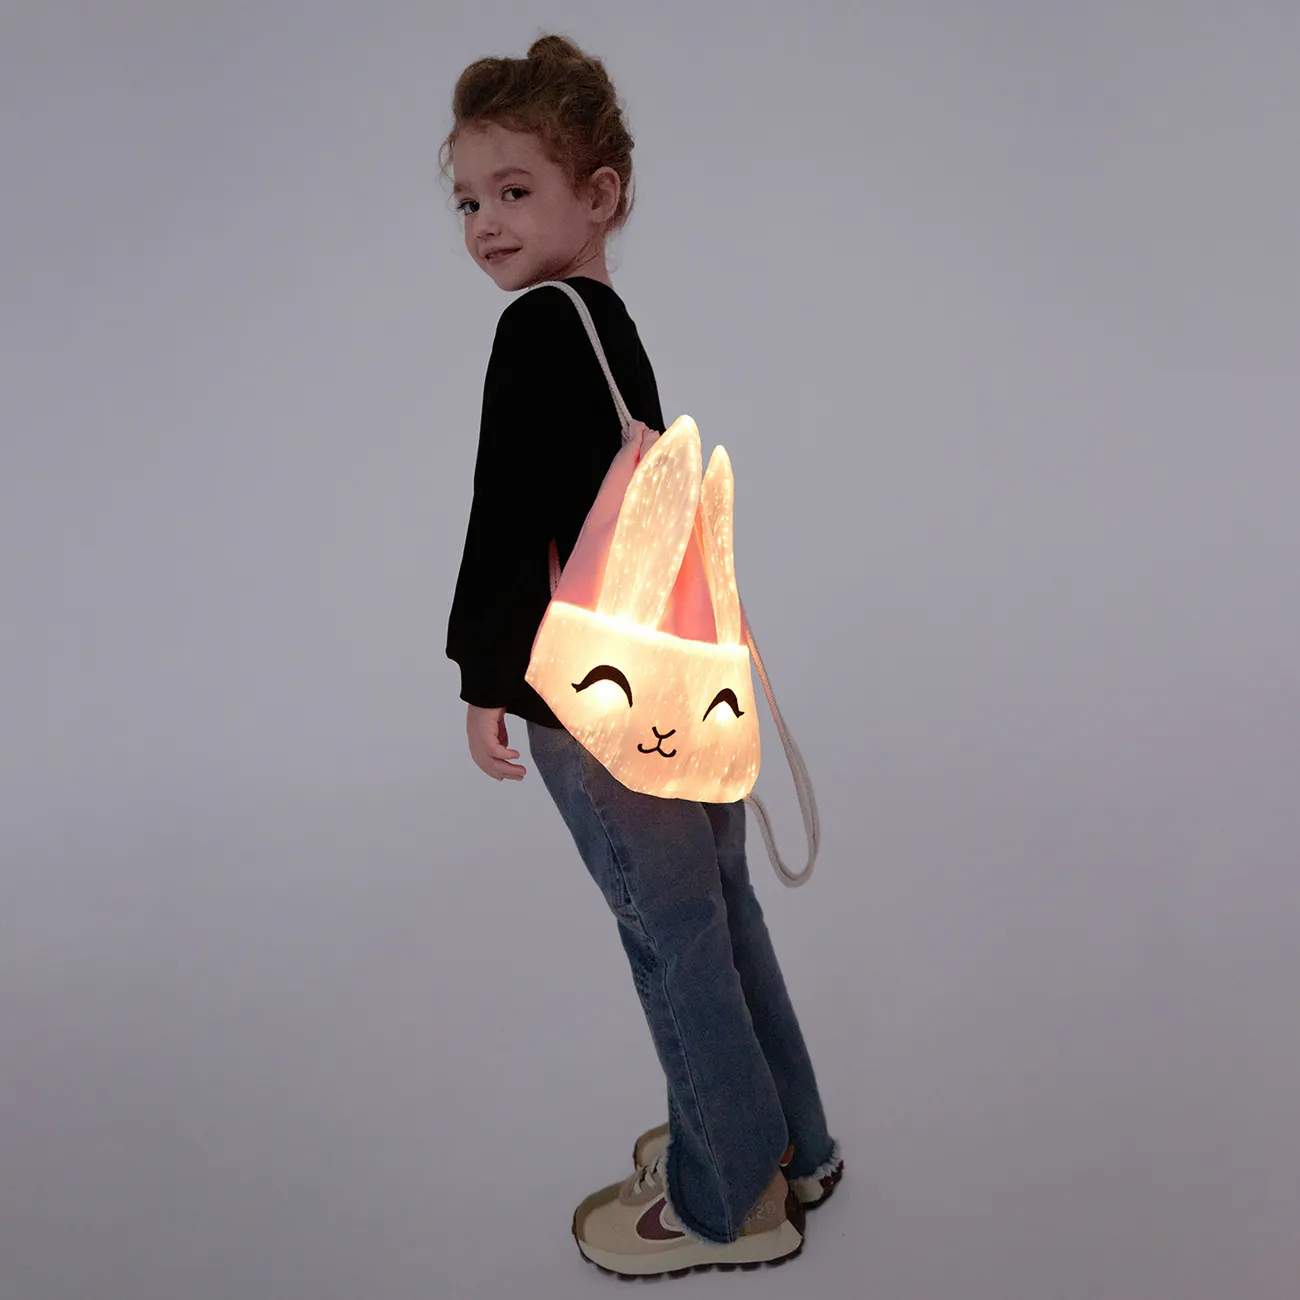 Go-Glow Light Up Rabbit Backpack Including Controller (Built-In Battery) PinkyWhite big image 1